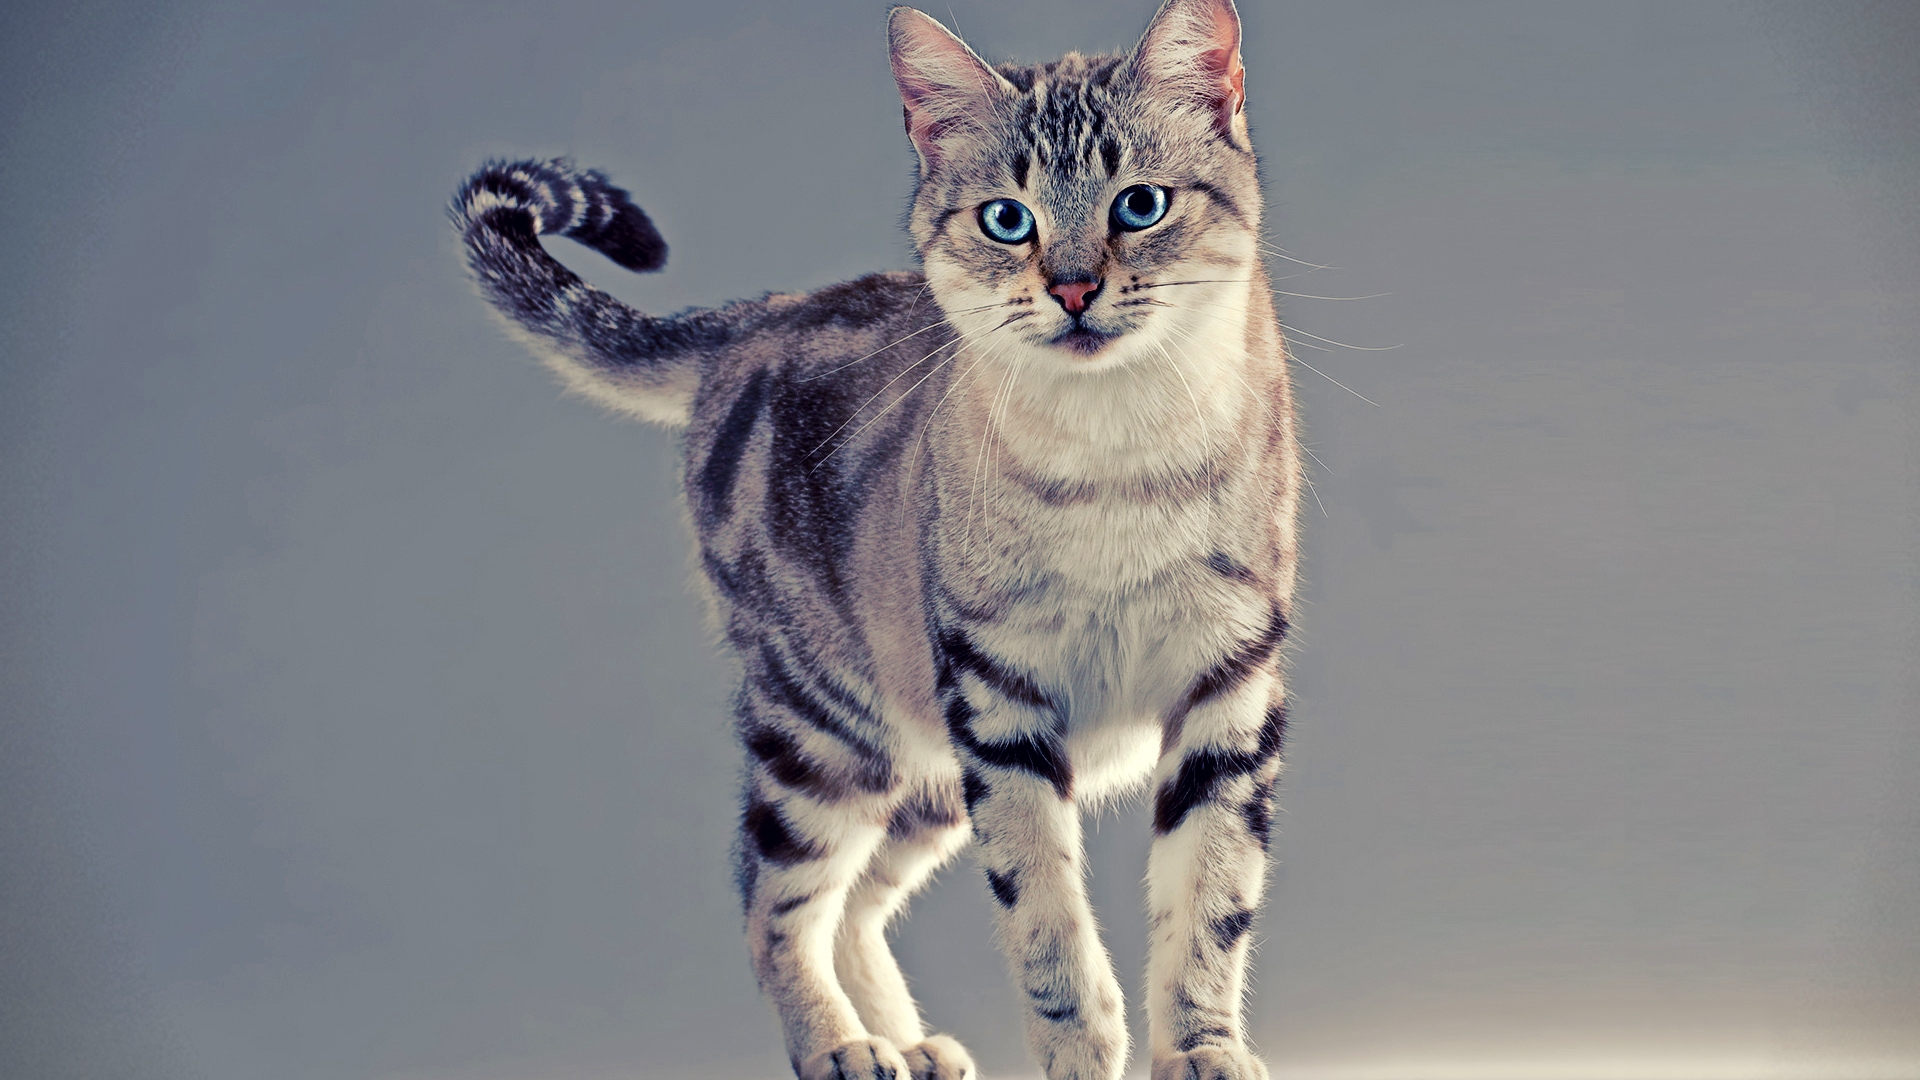 American Wirehair Cat for 1920 x 1080 HDTV 1080p resolution